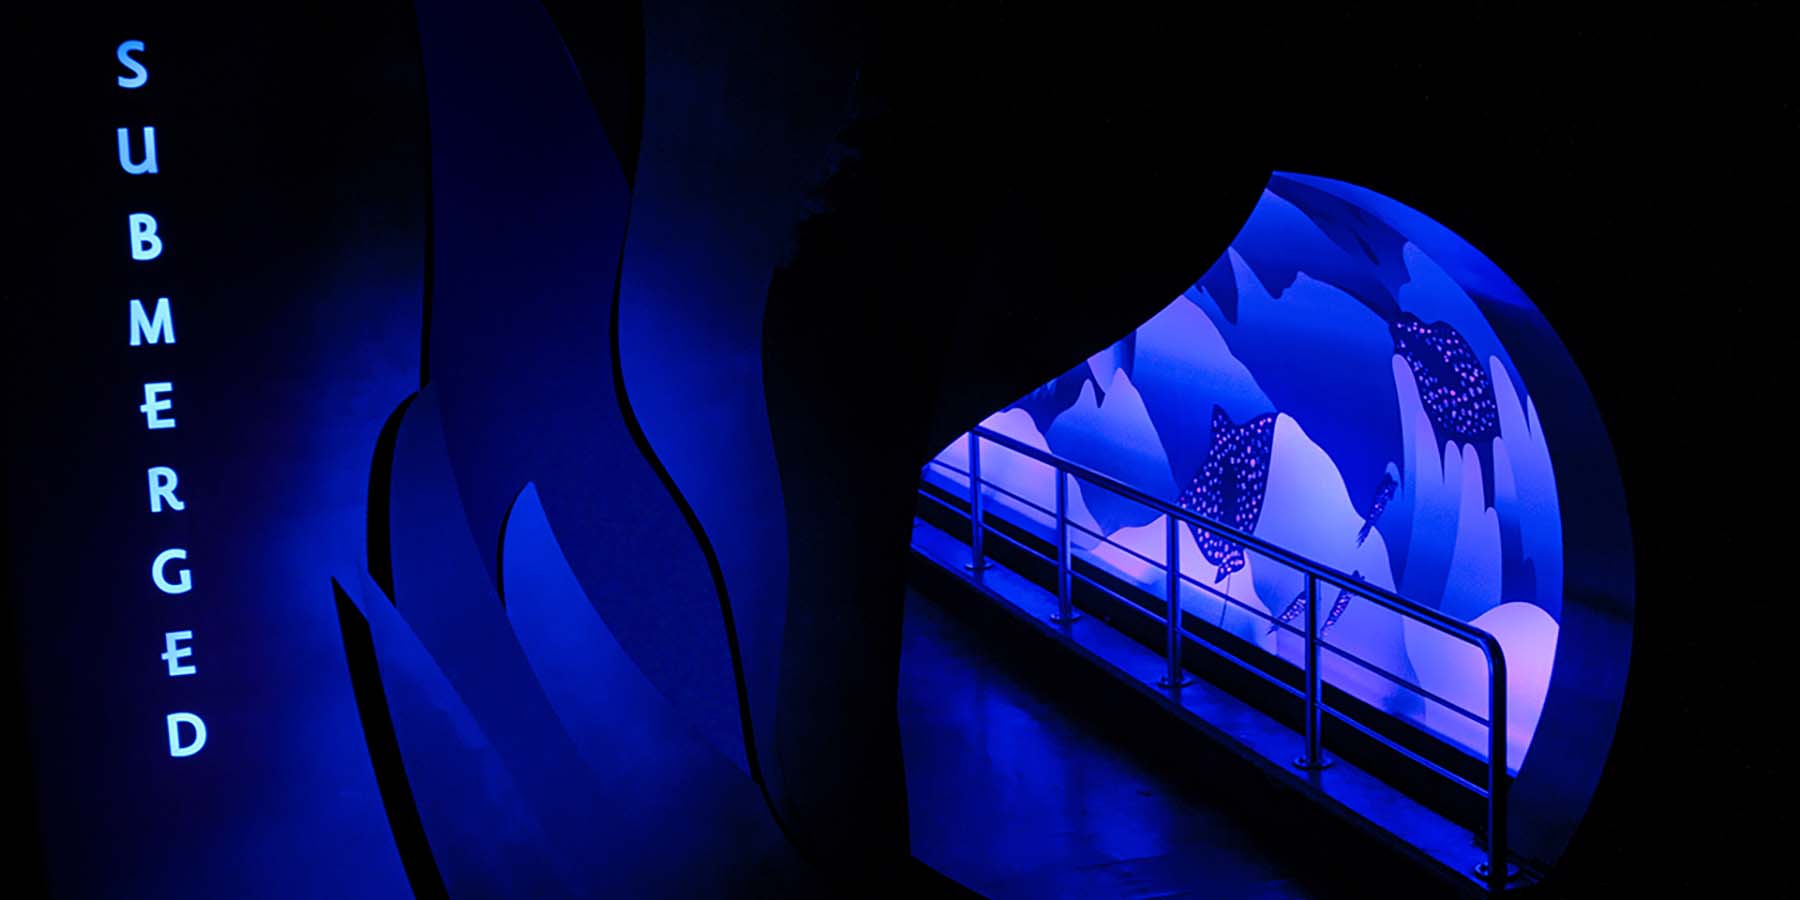 Entrance to the exhibition and the holographic, glowing tunnels